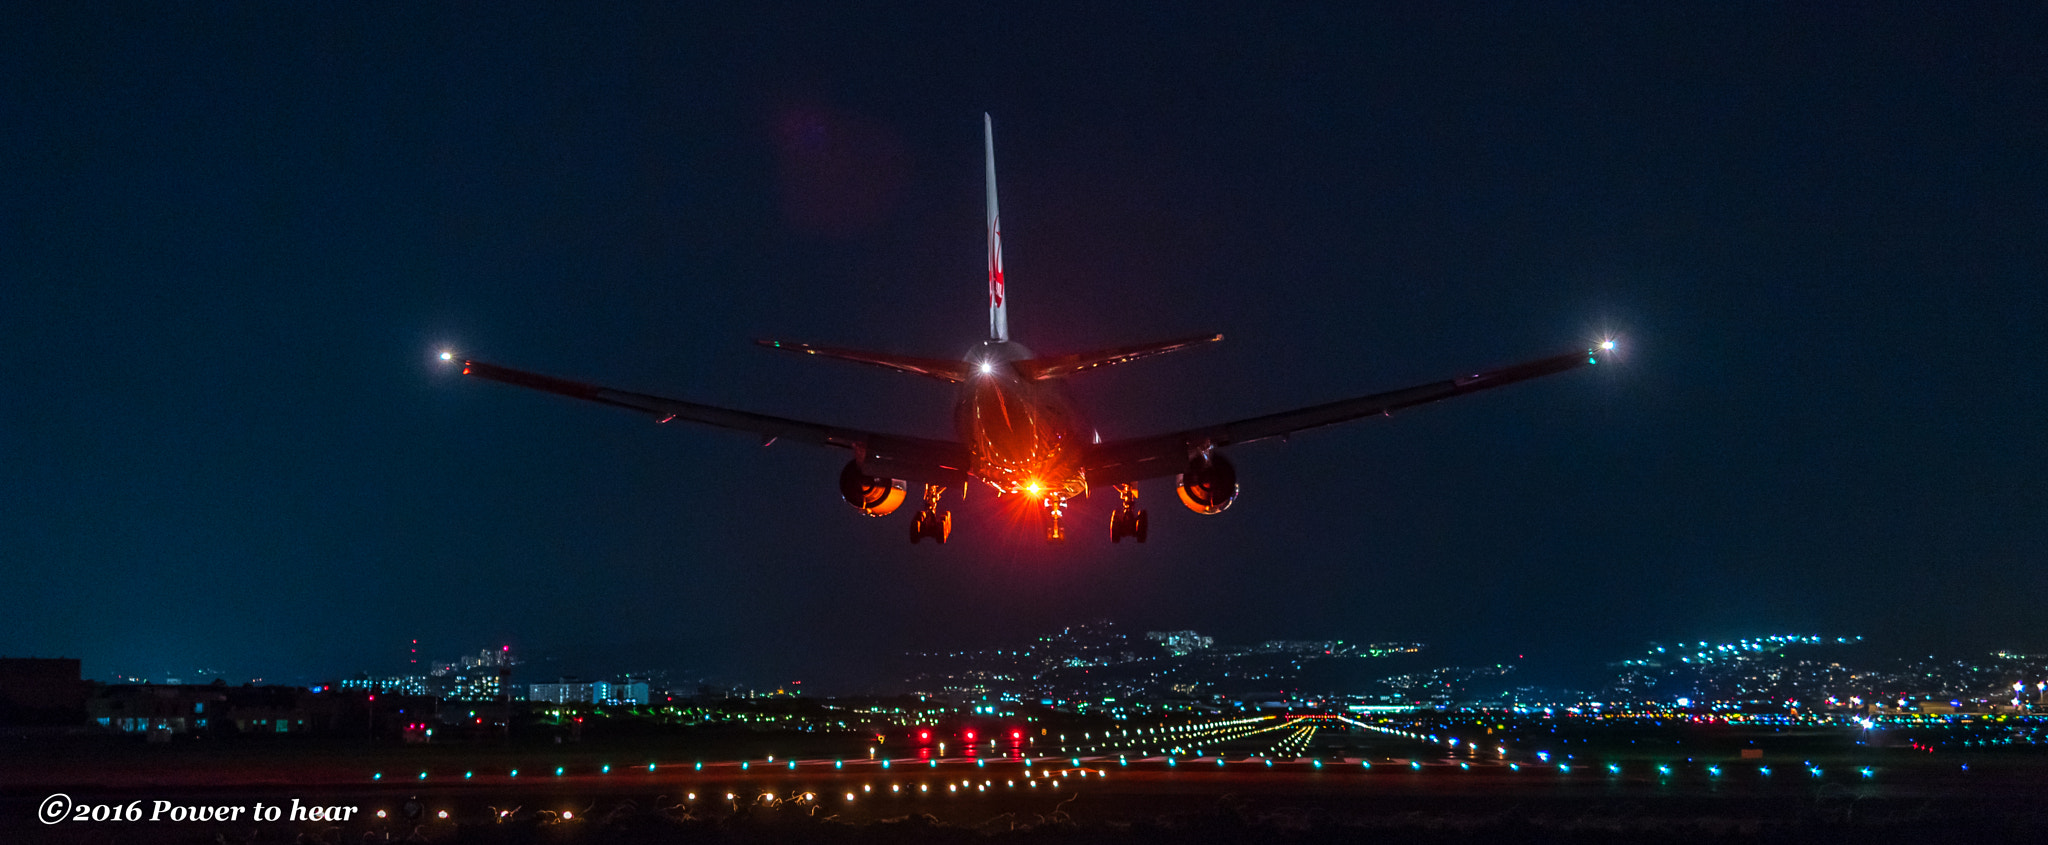 Nikon D5 + Sigma 50mm F1.4 DG HSM Art sample photo. Red flash in the pitch-black darkness, jal b777 photography